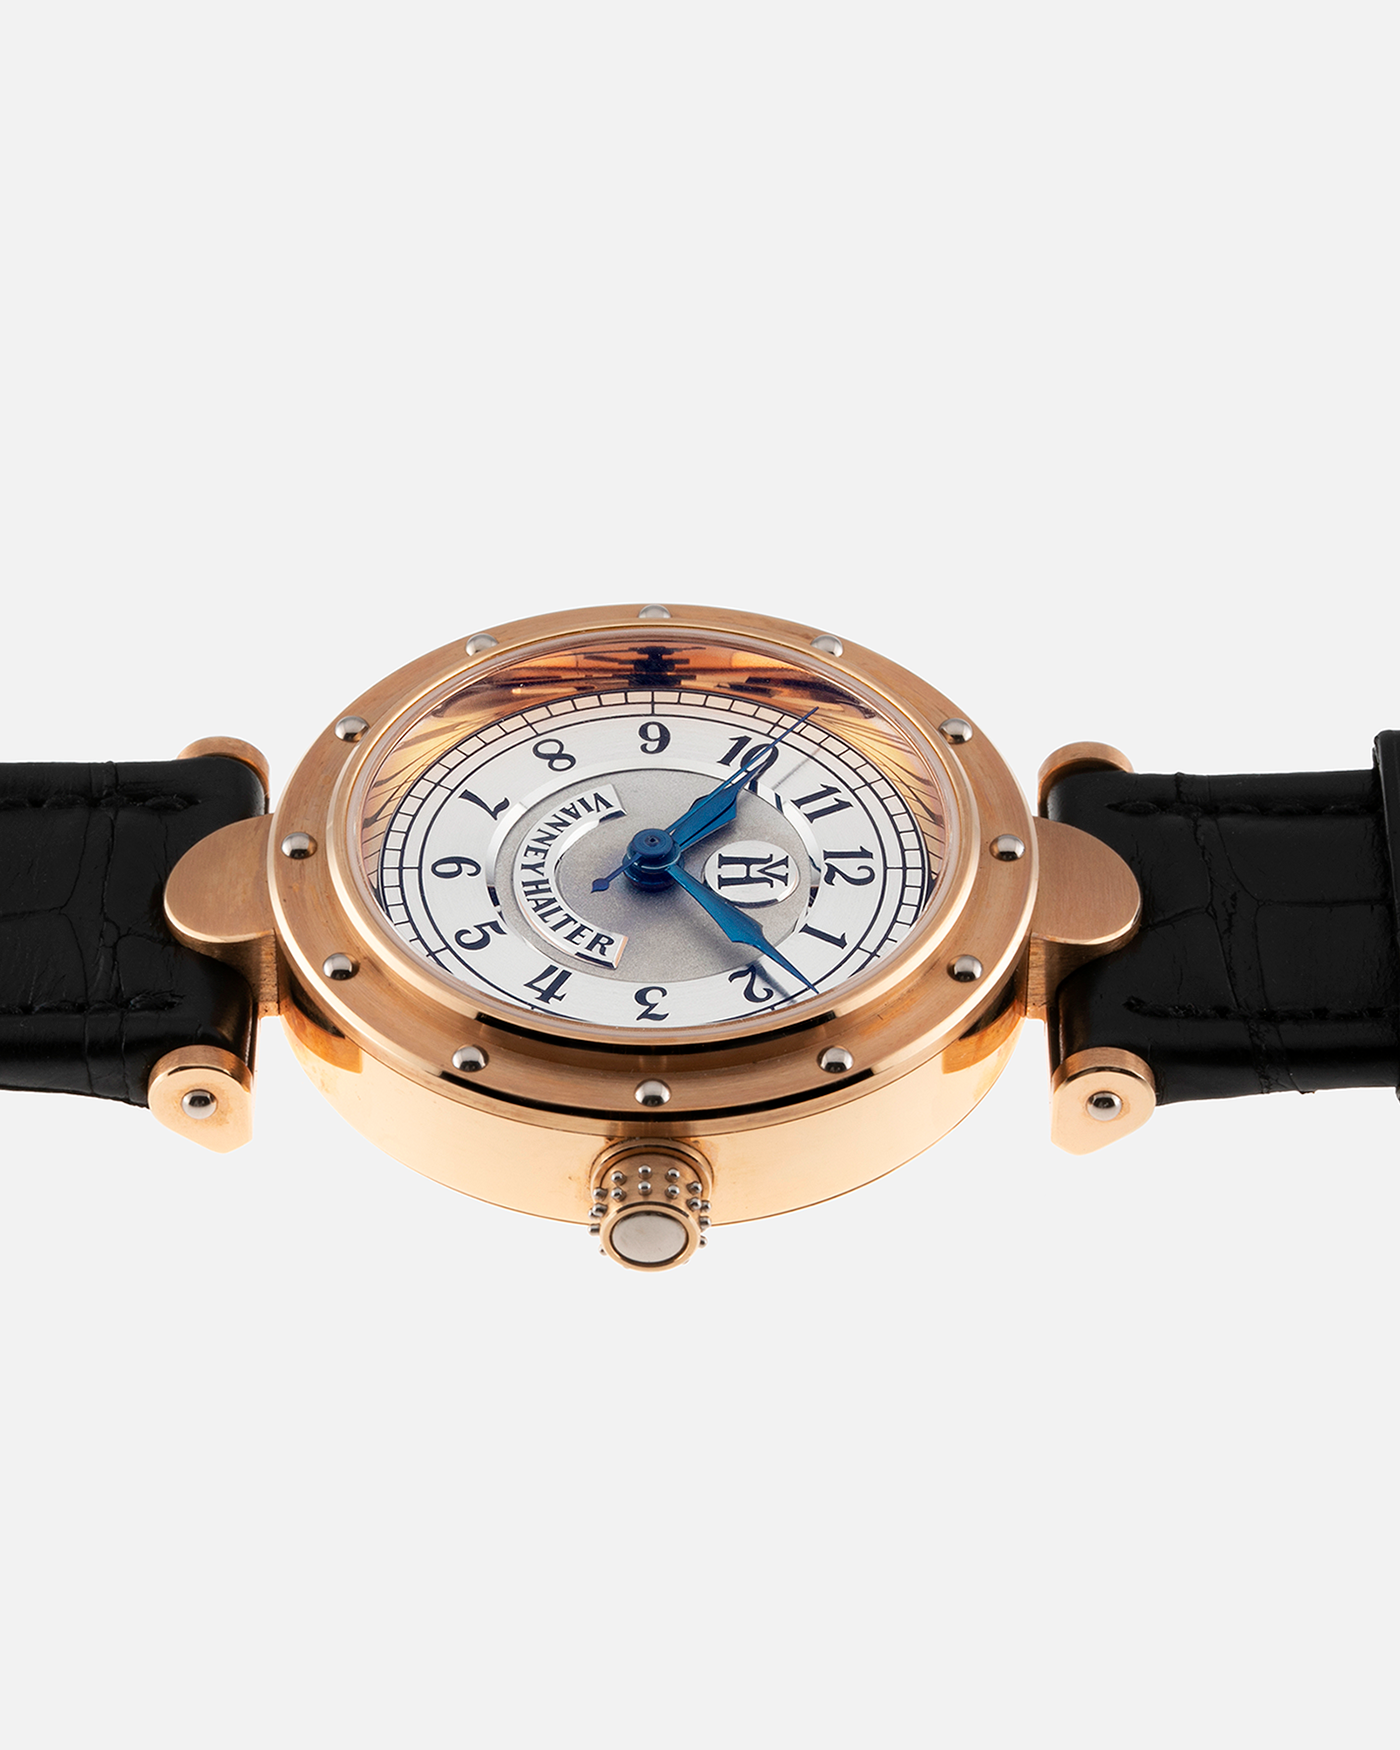 Brand: Vianney Halter Year: 2000’s Model: Classic Material: 18k Rose Gold Movement: Modified Lemania 8810 with mystery motor Case Diameter: 36mm Bracelet/Strap: Vianney Halter Black Alligator with matching Rose Gold Buckle